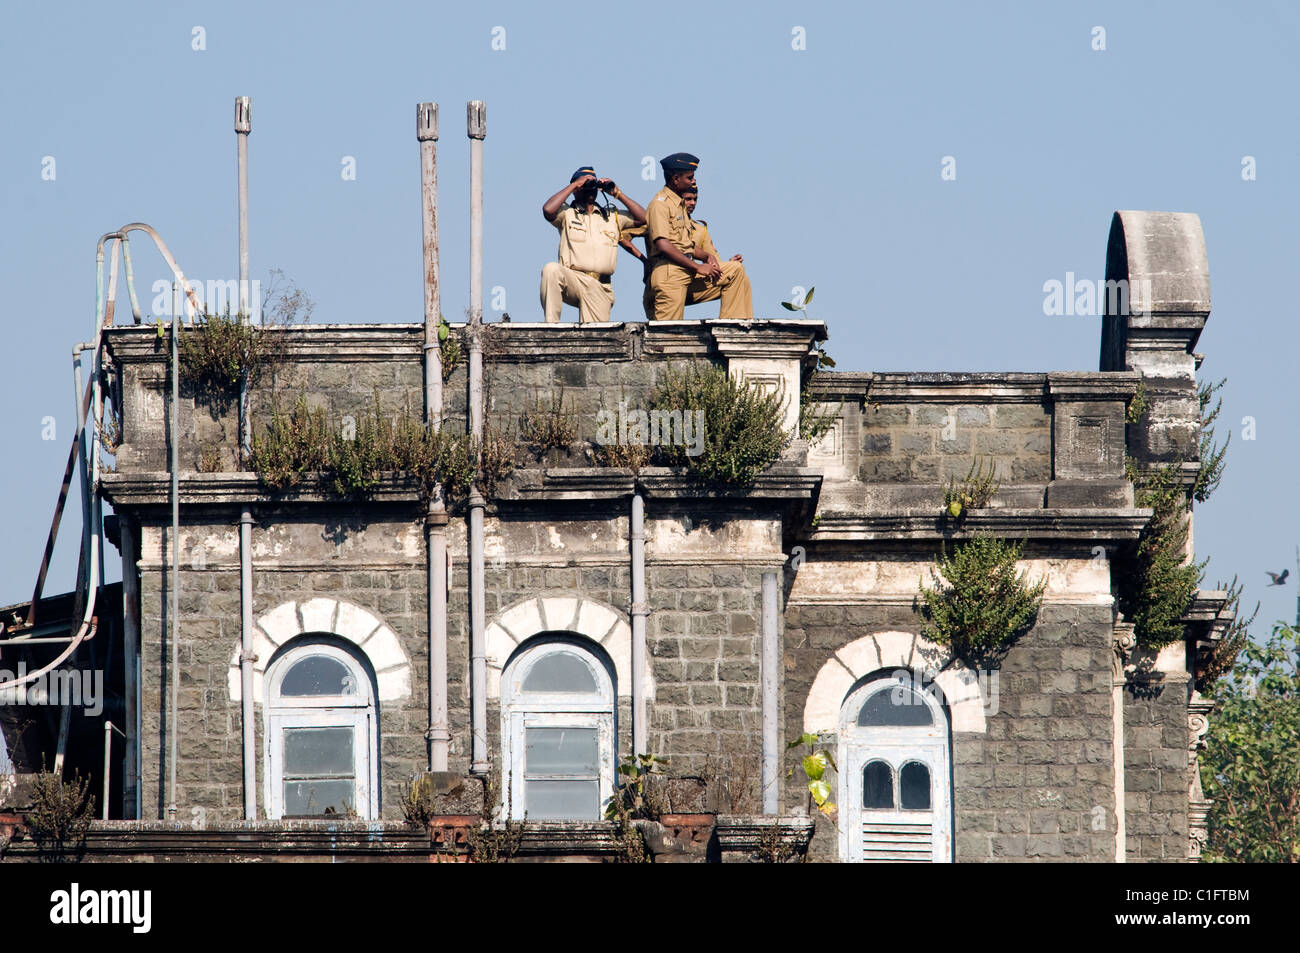 Building roof with guards, Fort Area, Mumbai, India Stock Photo